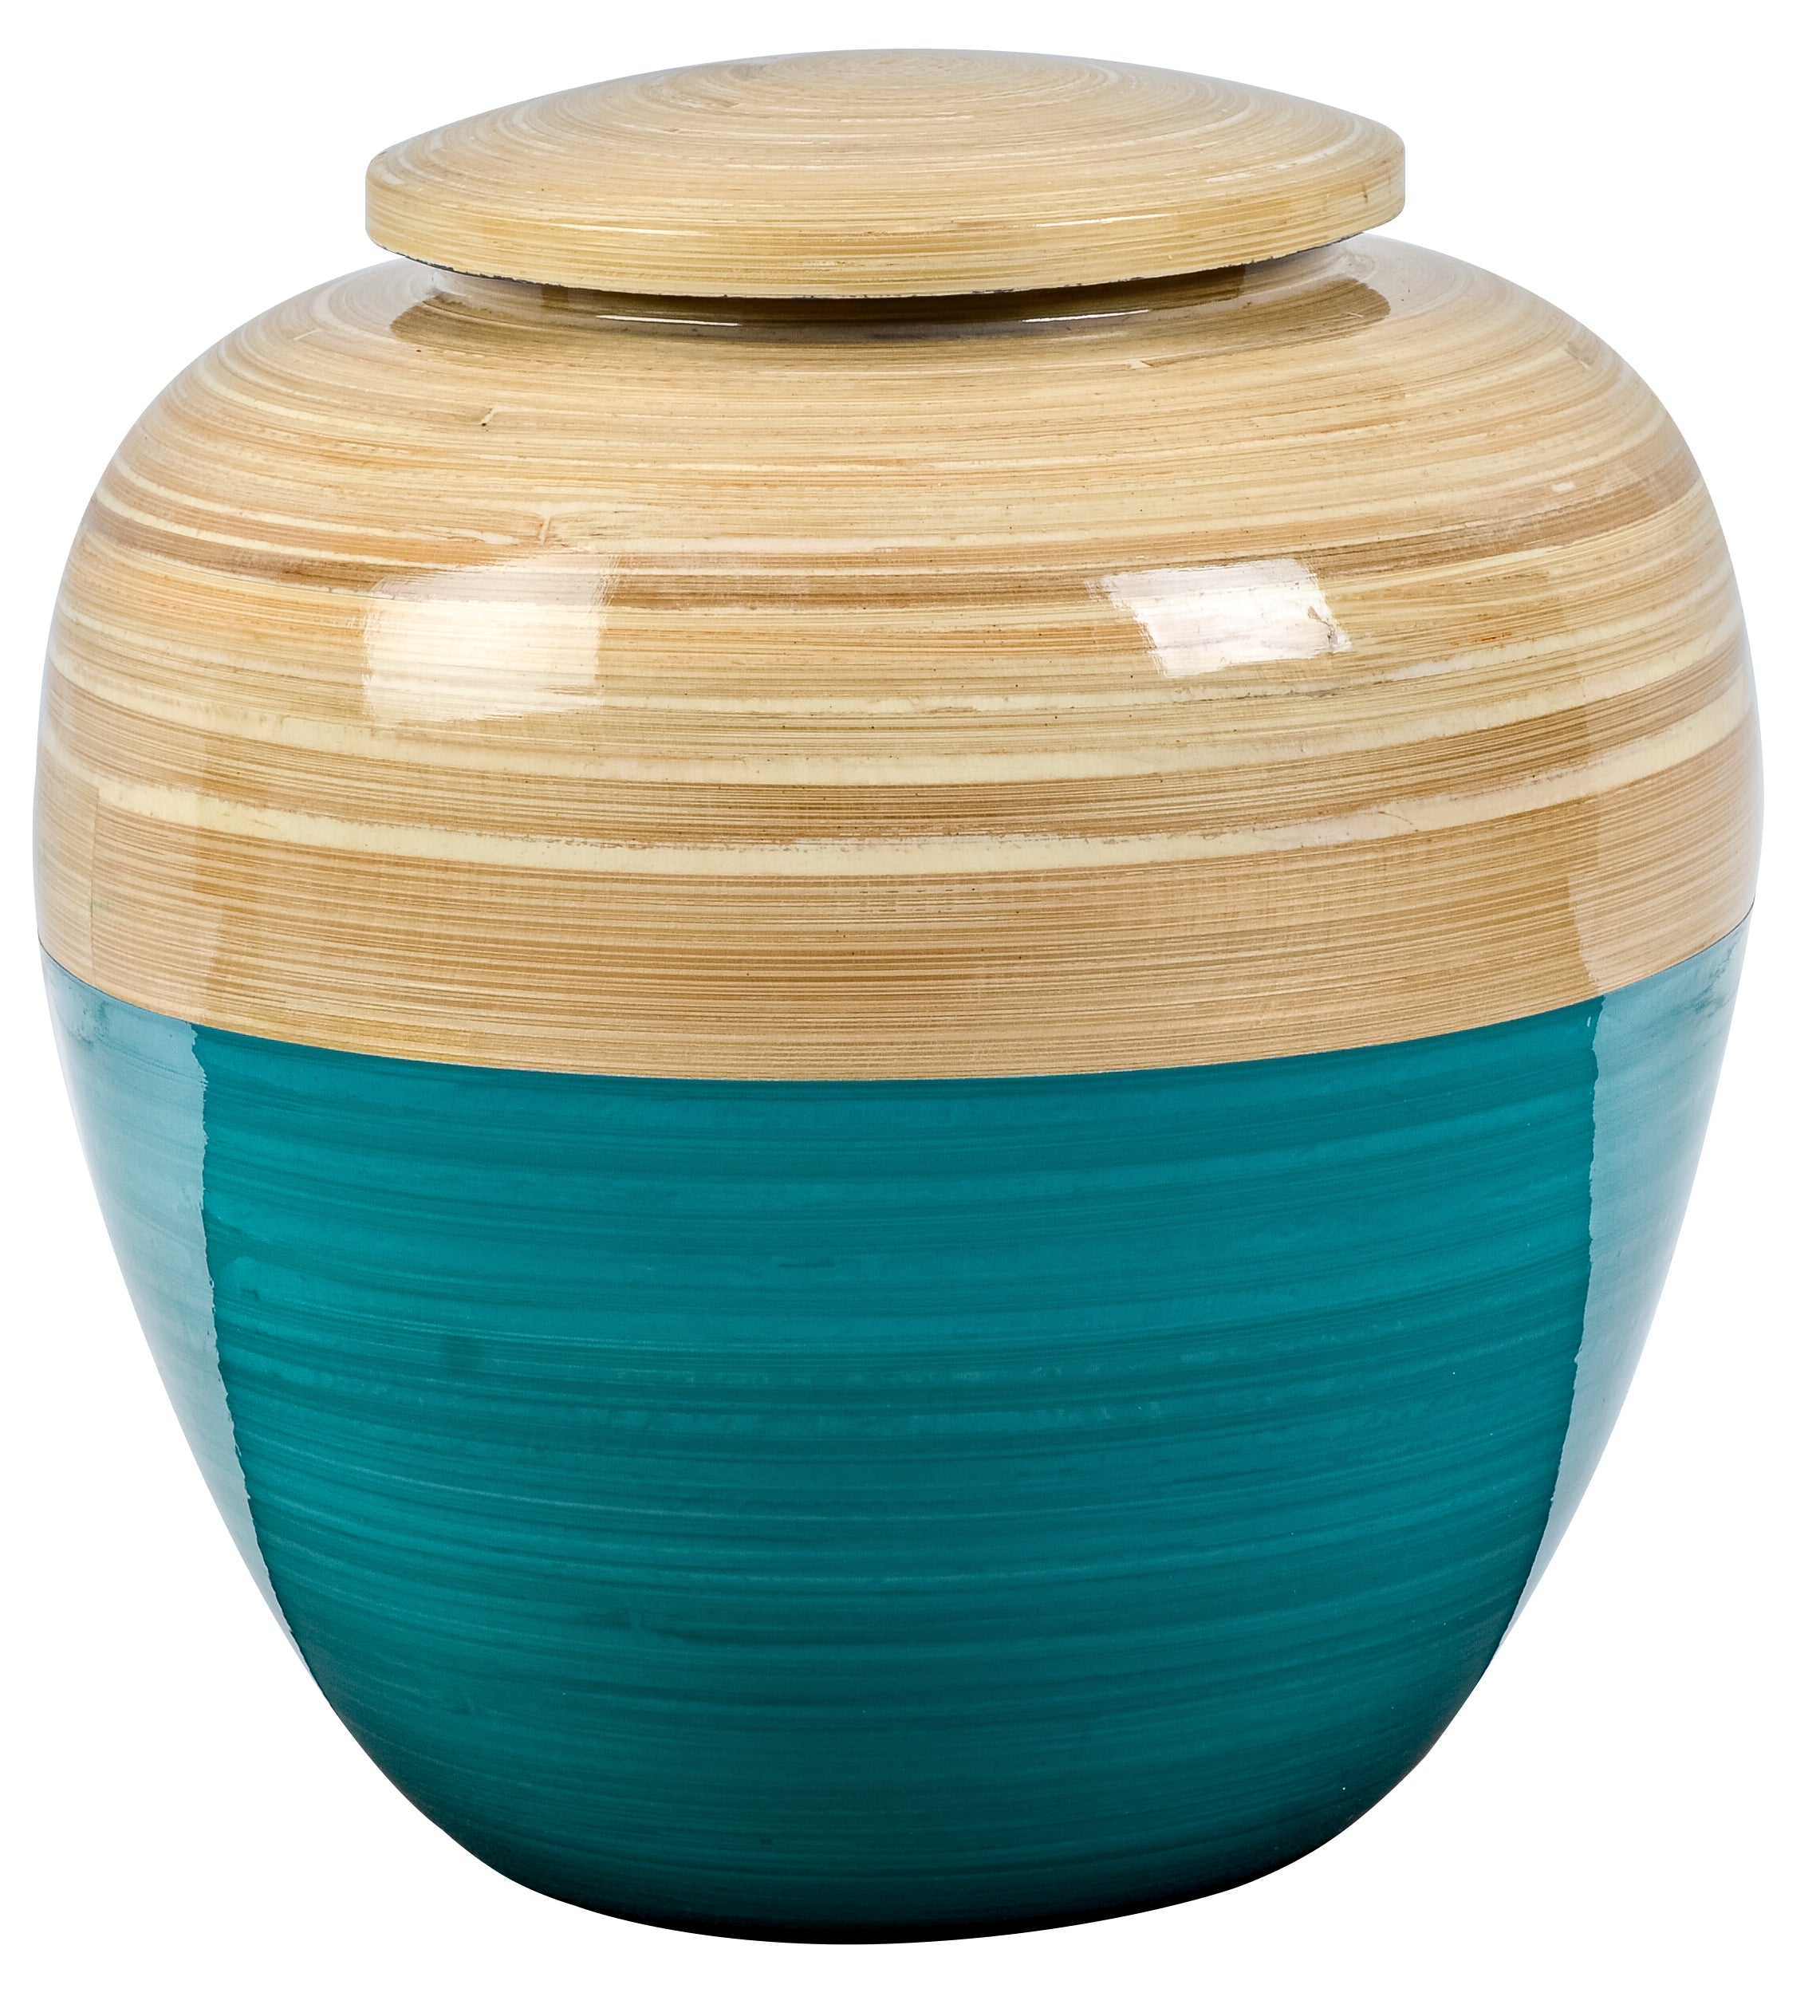 Bamboo Shine Adult Cremation Ashes Urn Brown